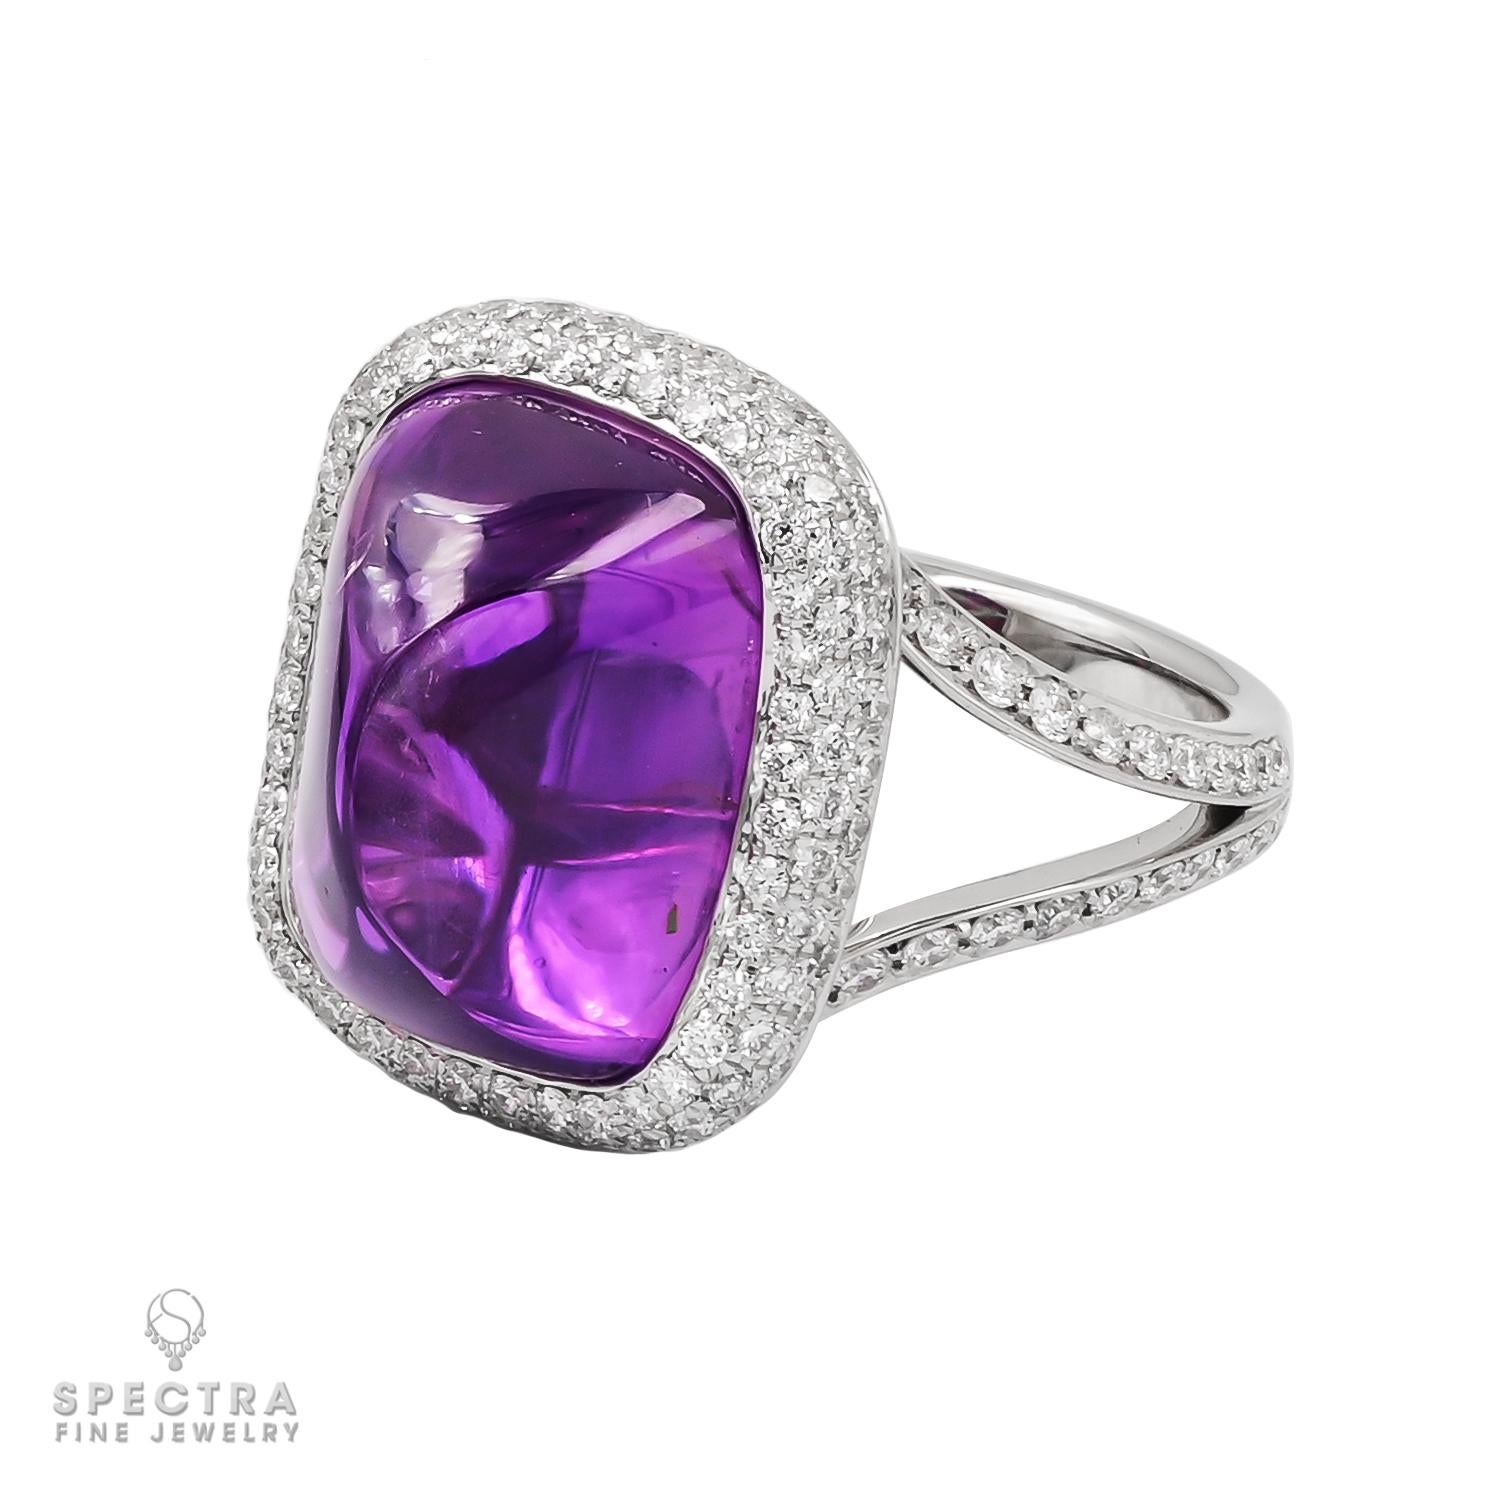 Introducing the epitome of regal elegance, behold the breathtaking 15.83-carat Sugarloaf Cabochon Purple Sapphire Diamond Ring, meticulously crafted by Spectra Fine Jewelry in 2022. This magnificent piece features a mesmerizing purple sapphire of